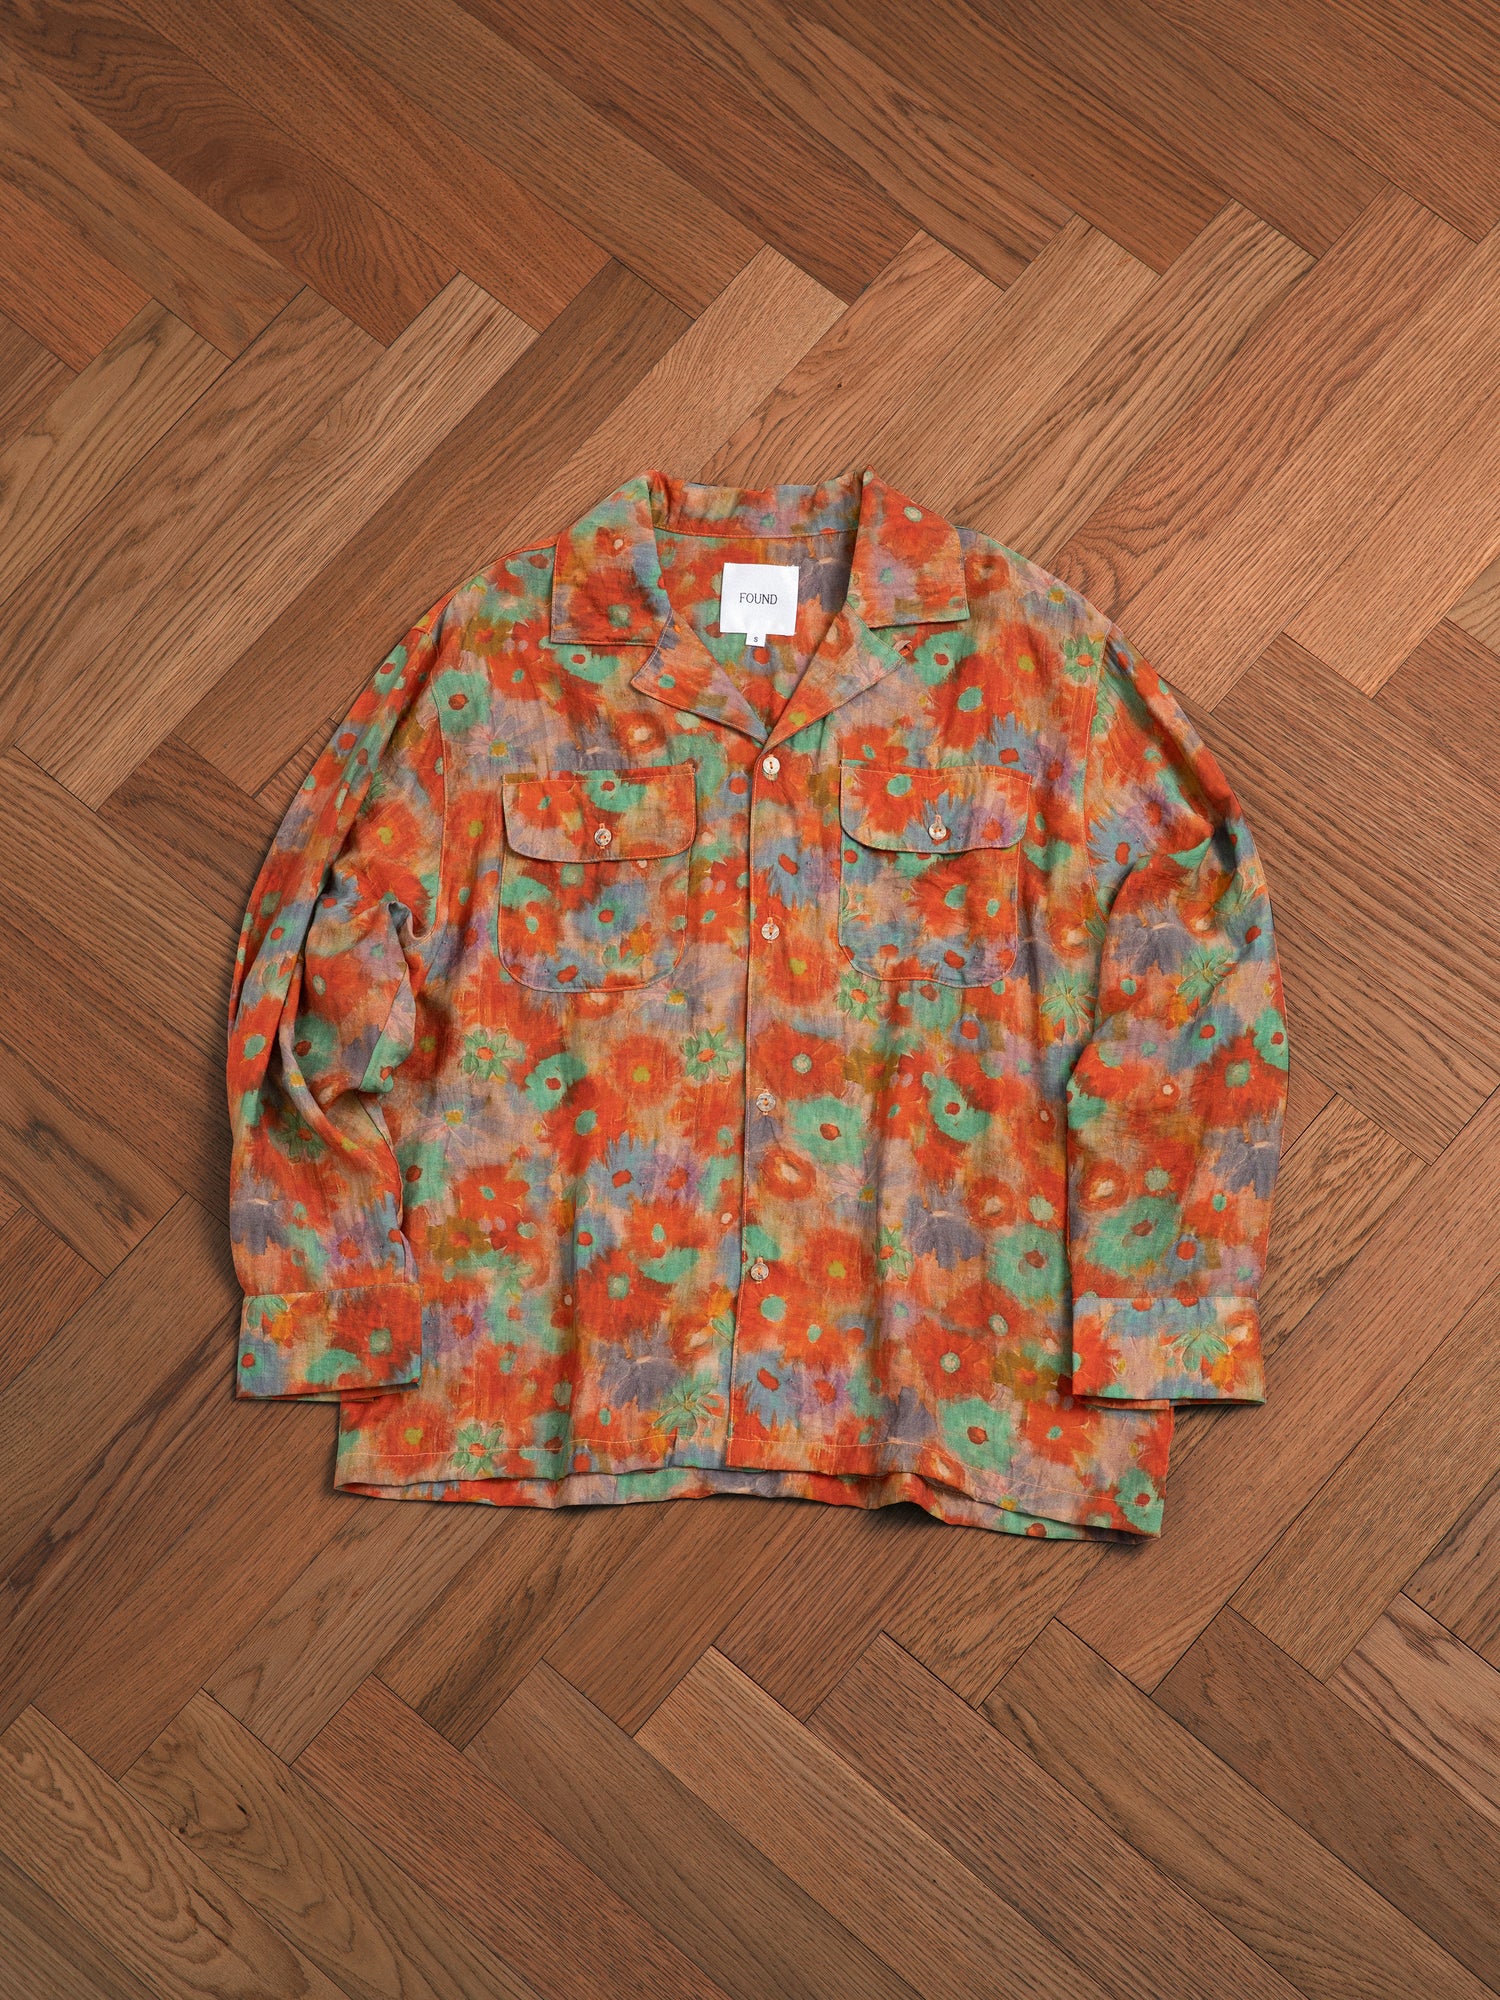 A Found Waterblend LS Camp Shirt with orange floral patterns adds classic appeal, resting on a hardwood floor.